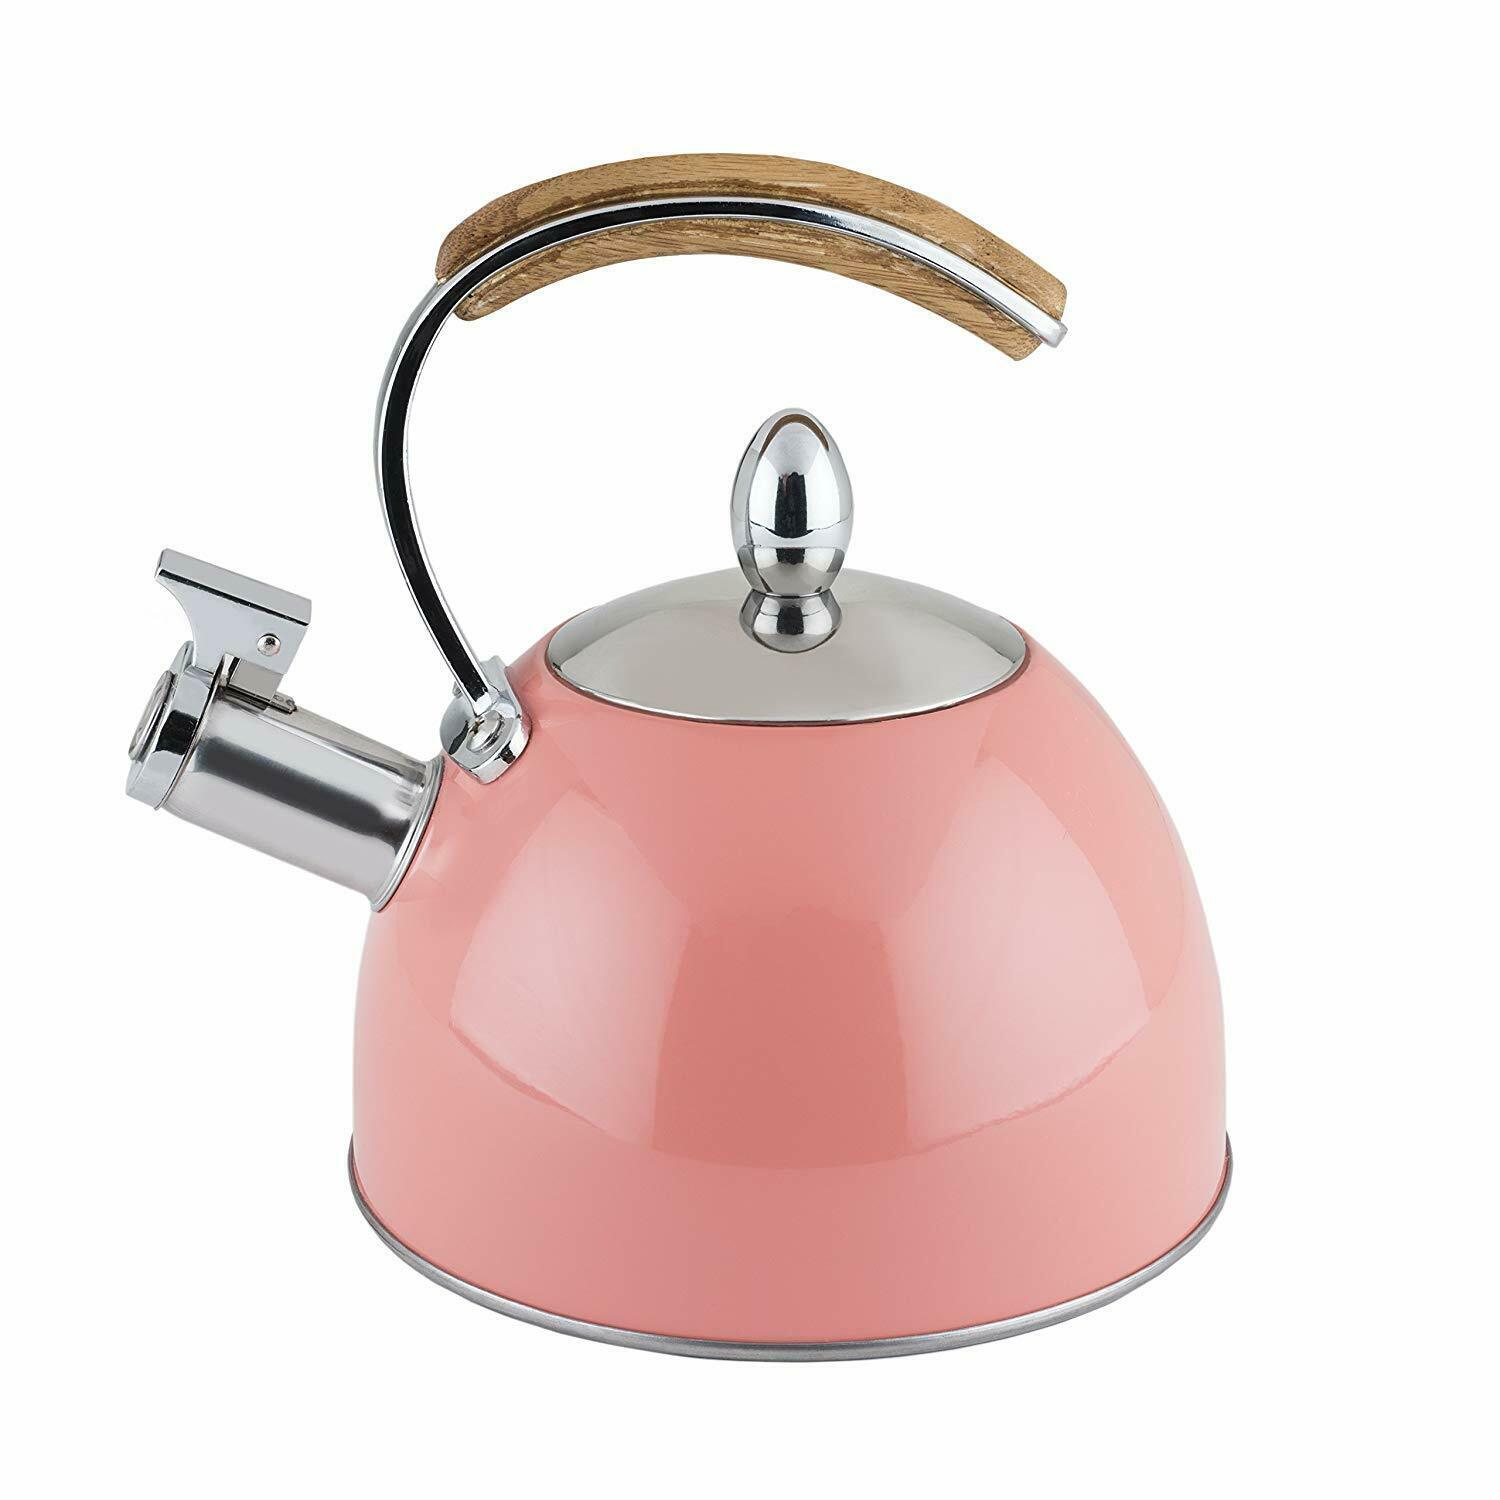 Primary image for Pinky Up 5054 Presley Tea Kettle in Peach